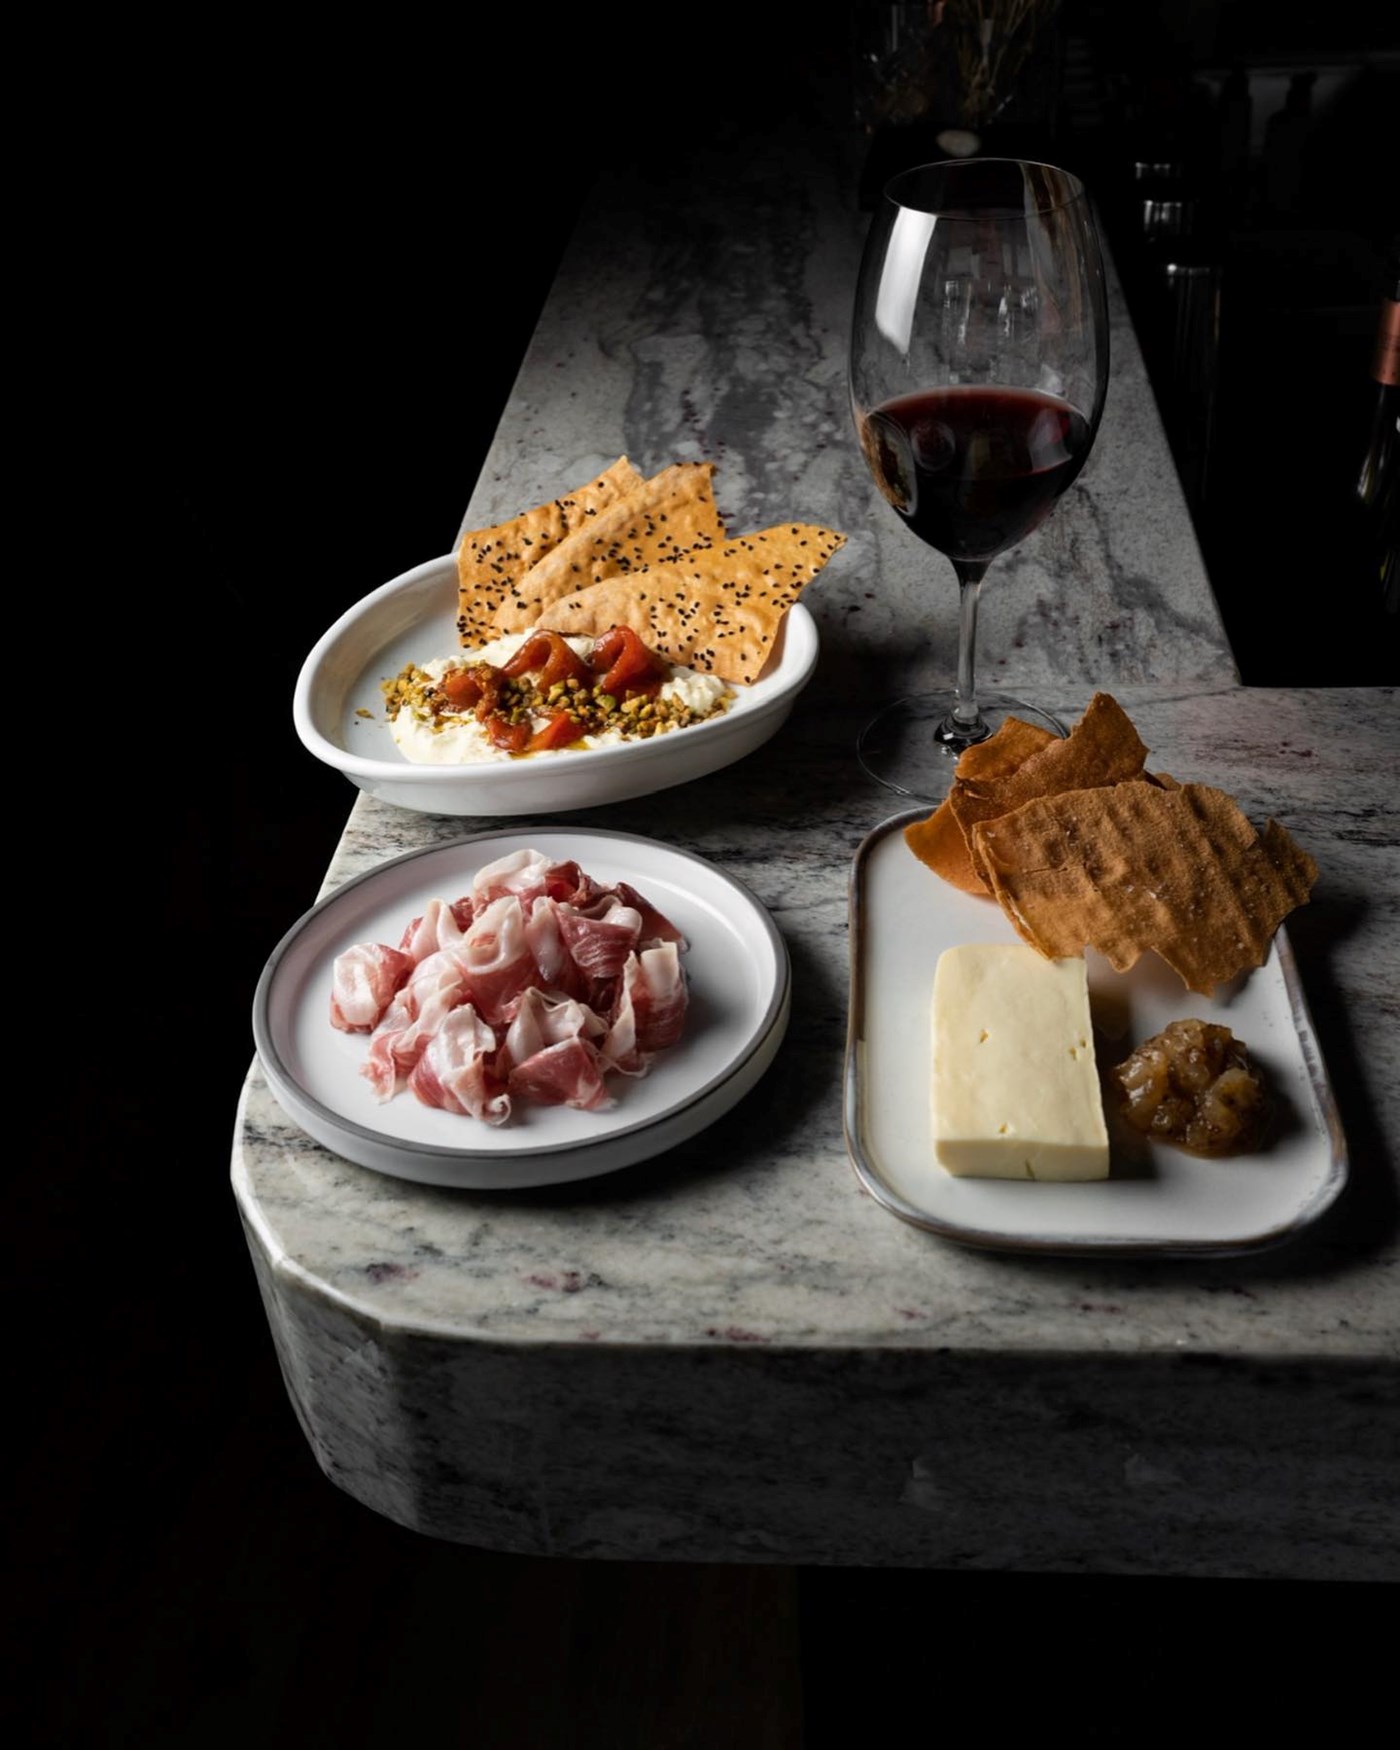 A moody bar, with charcuterie meats and cheeses served on the corner with a glass of red wine